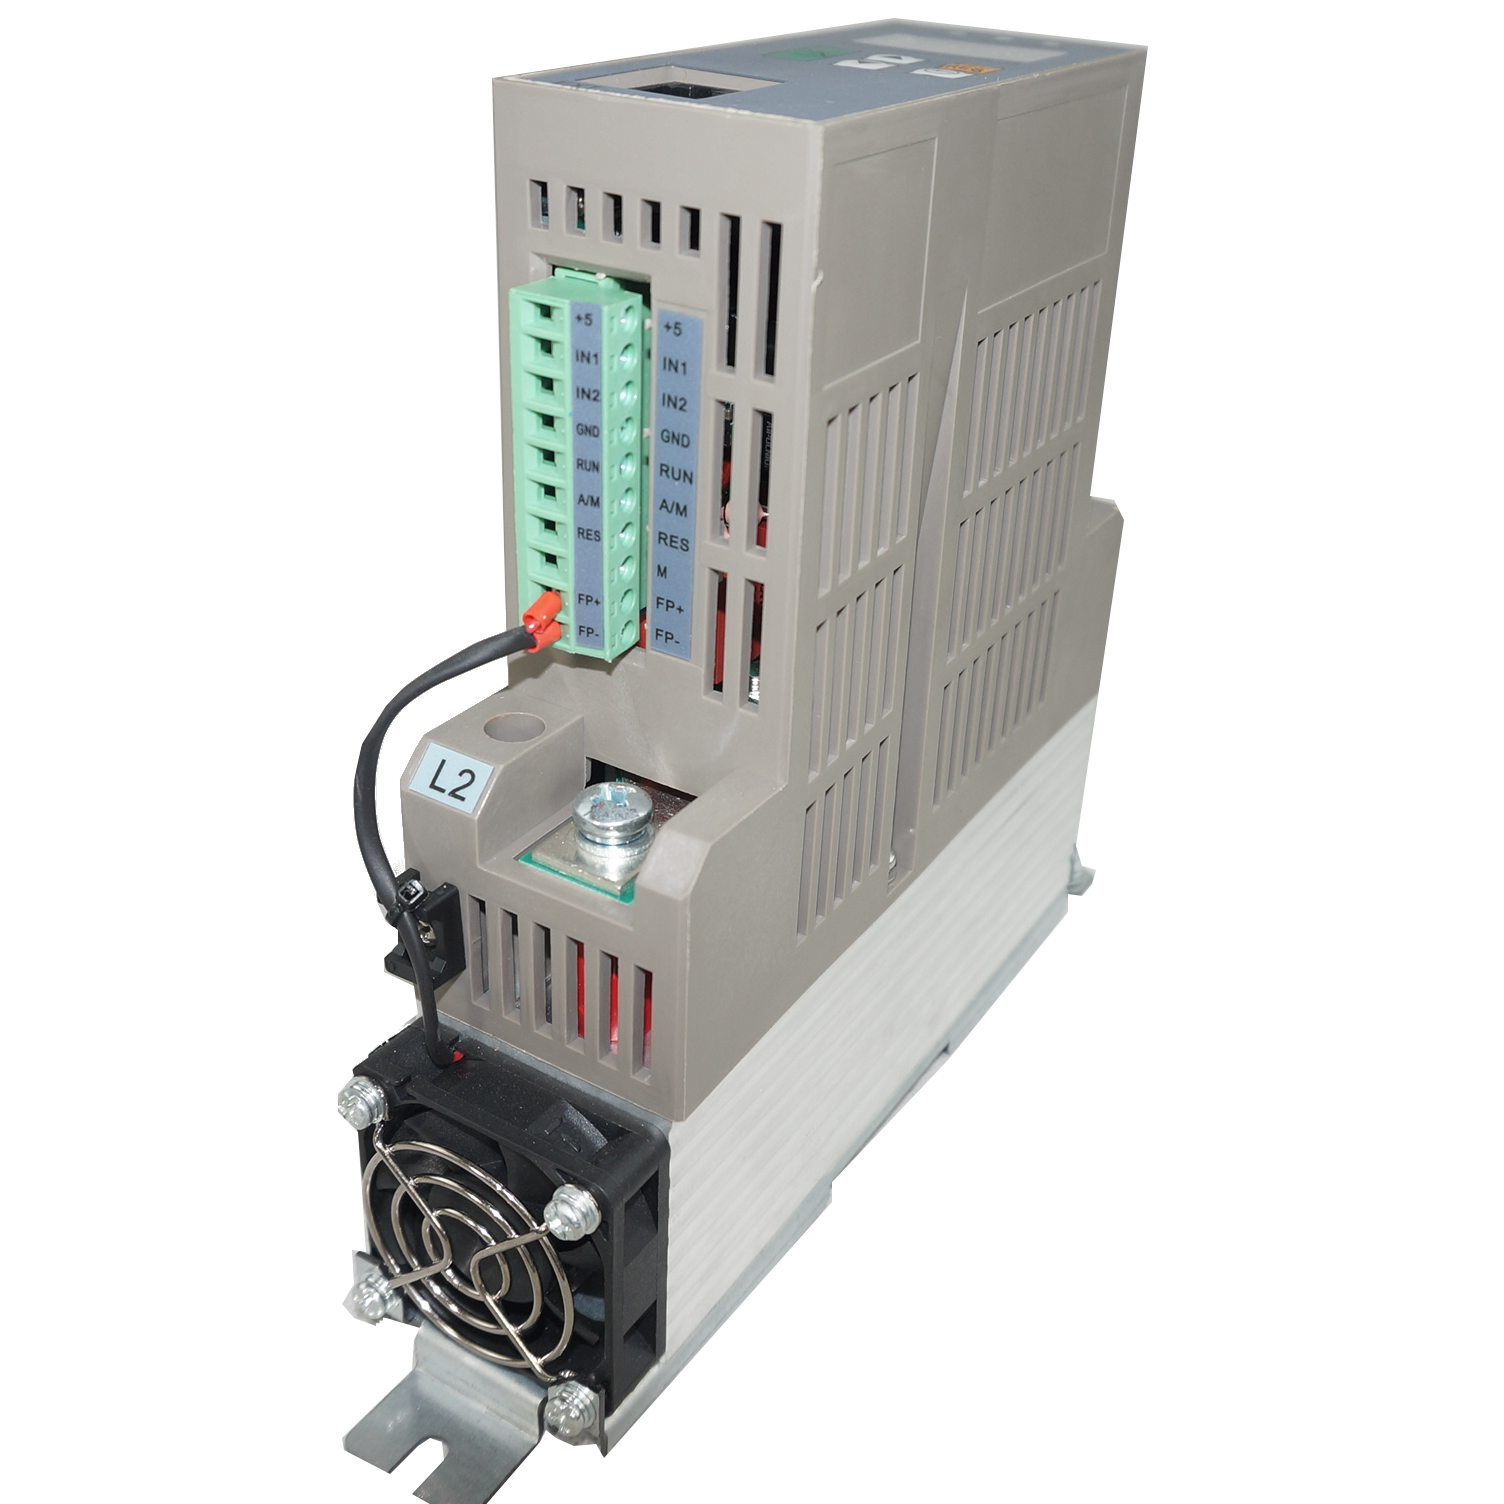 FTM1-A20-V2-W0, Single Phase, Phase Angle/Burst Controller for Primary Control of Transformer (Phase Angle mode only), Voltage/Current/Power Limit Modes, For Single Phase Loads, 230VAC, 16 Amps @ 50 Deg C